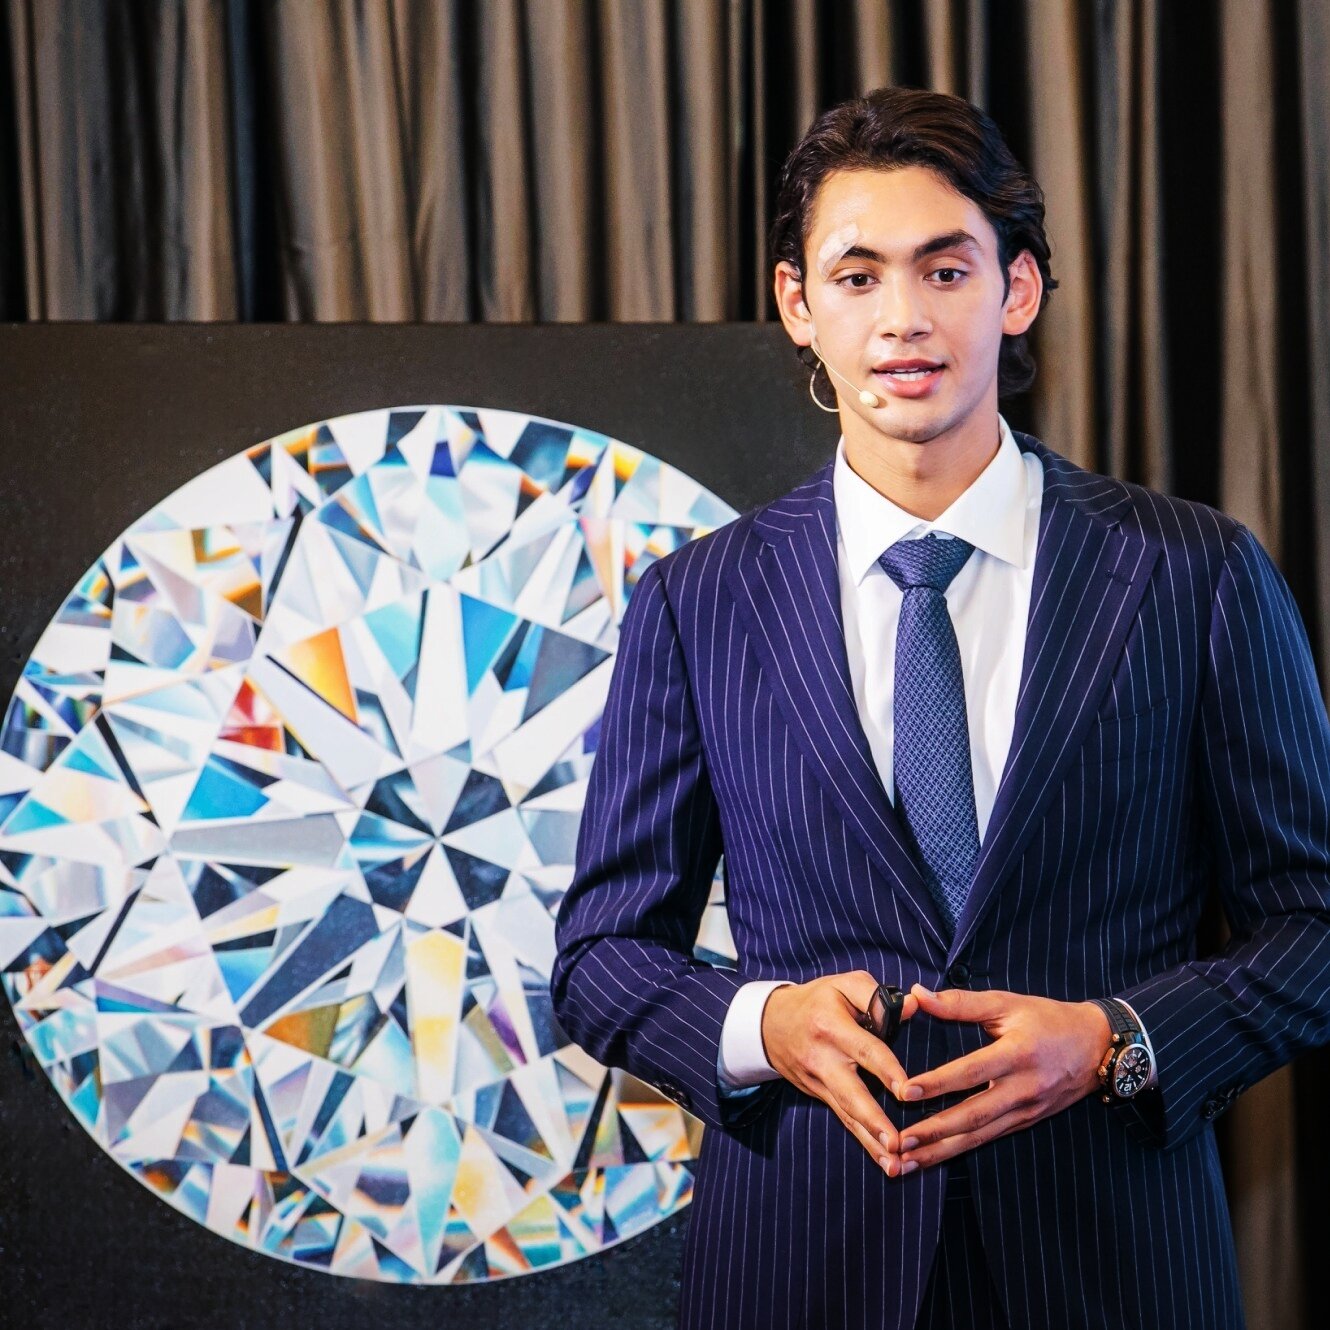  Jimmy Mouawad introduces the Mouawad Diamond Impact Fund at the Private viewing, with Reena’s painting as a perfect backdrop. 